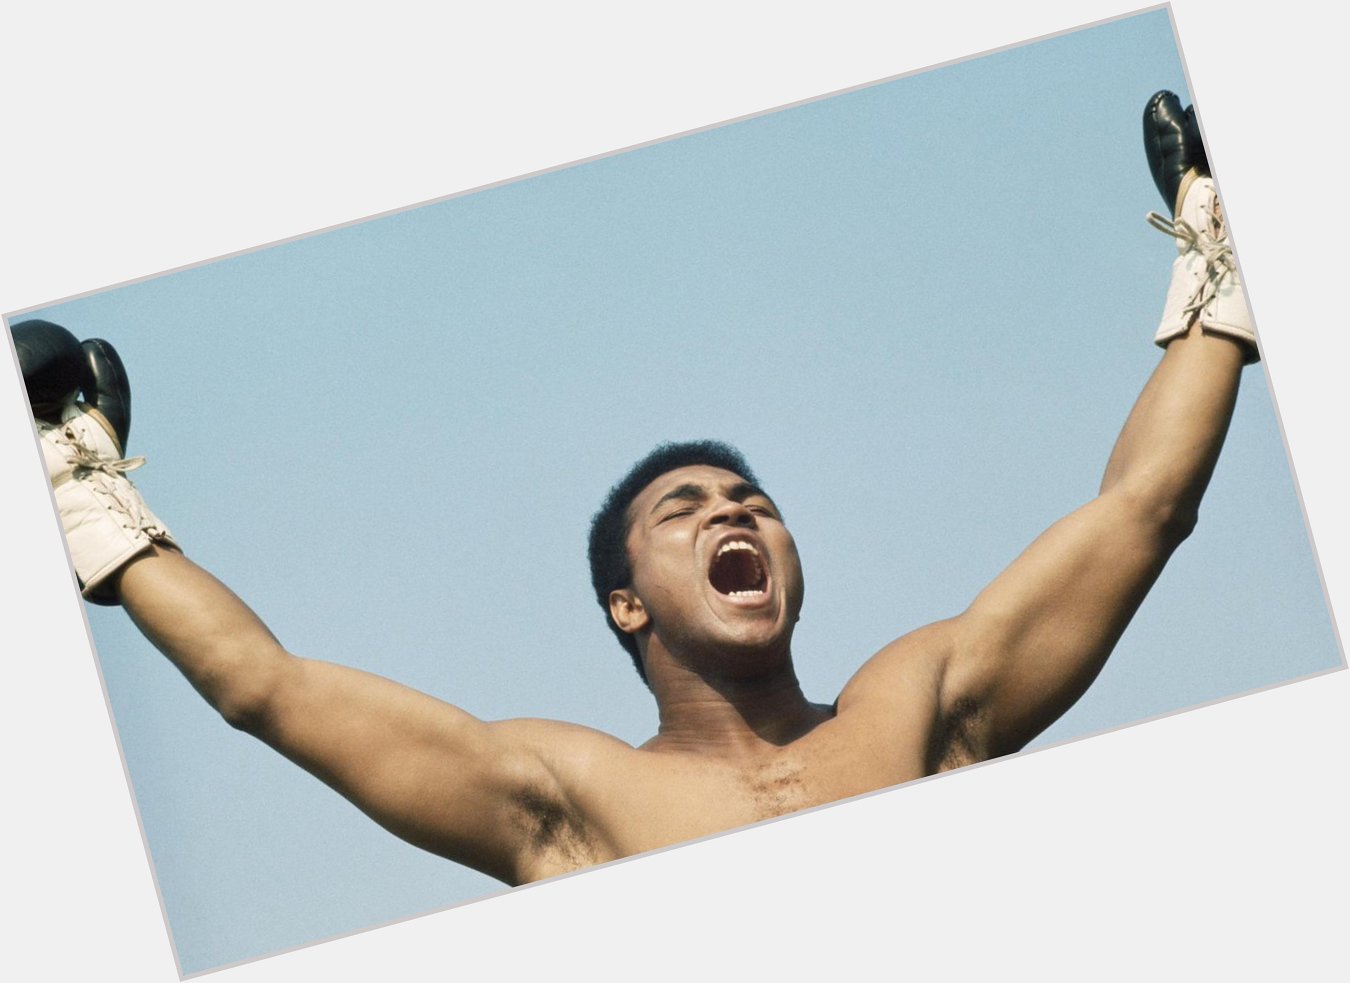 He floats like a butterfly and stings like a bee.

Happy 73rd Birthday to Muhammad Ali! 